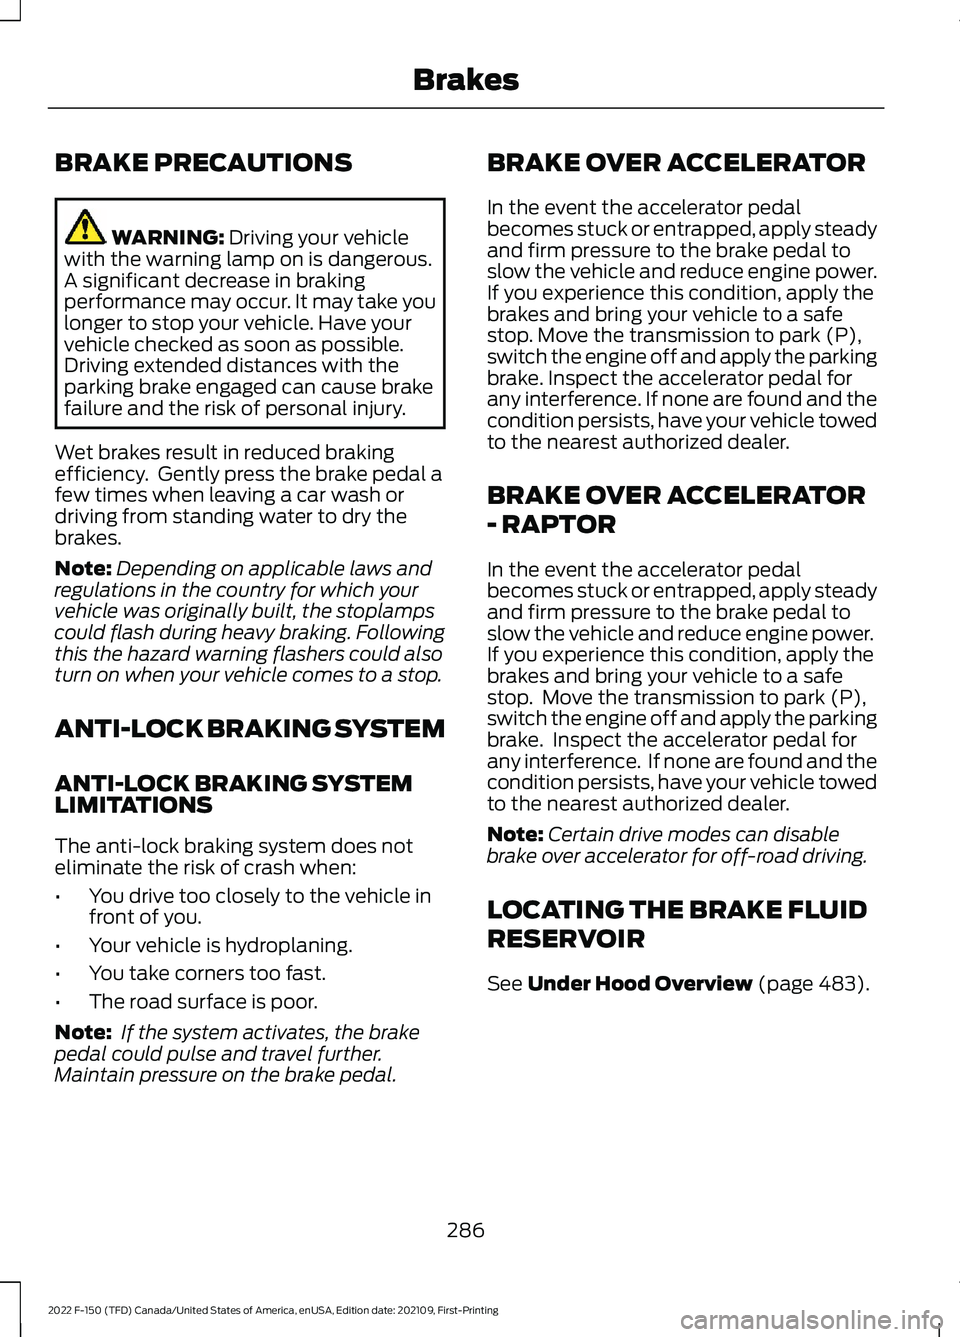 FORD F-150 2022 Owners Guide BRAKE PRECAUTIONS
WARNING: Driving your vehicle
with the warning lamp on is dangerous.
A significant decrease in braking
performance may occur. It may take you
longer to stop your vehicle. Have your
v